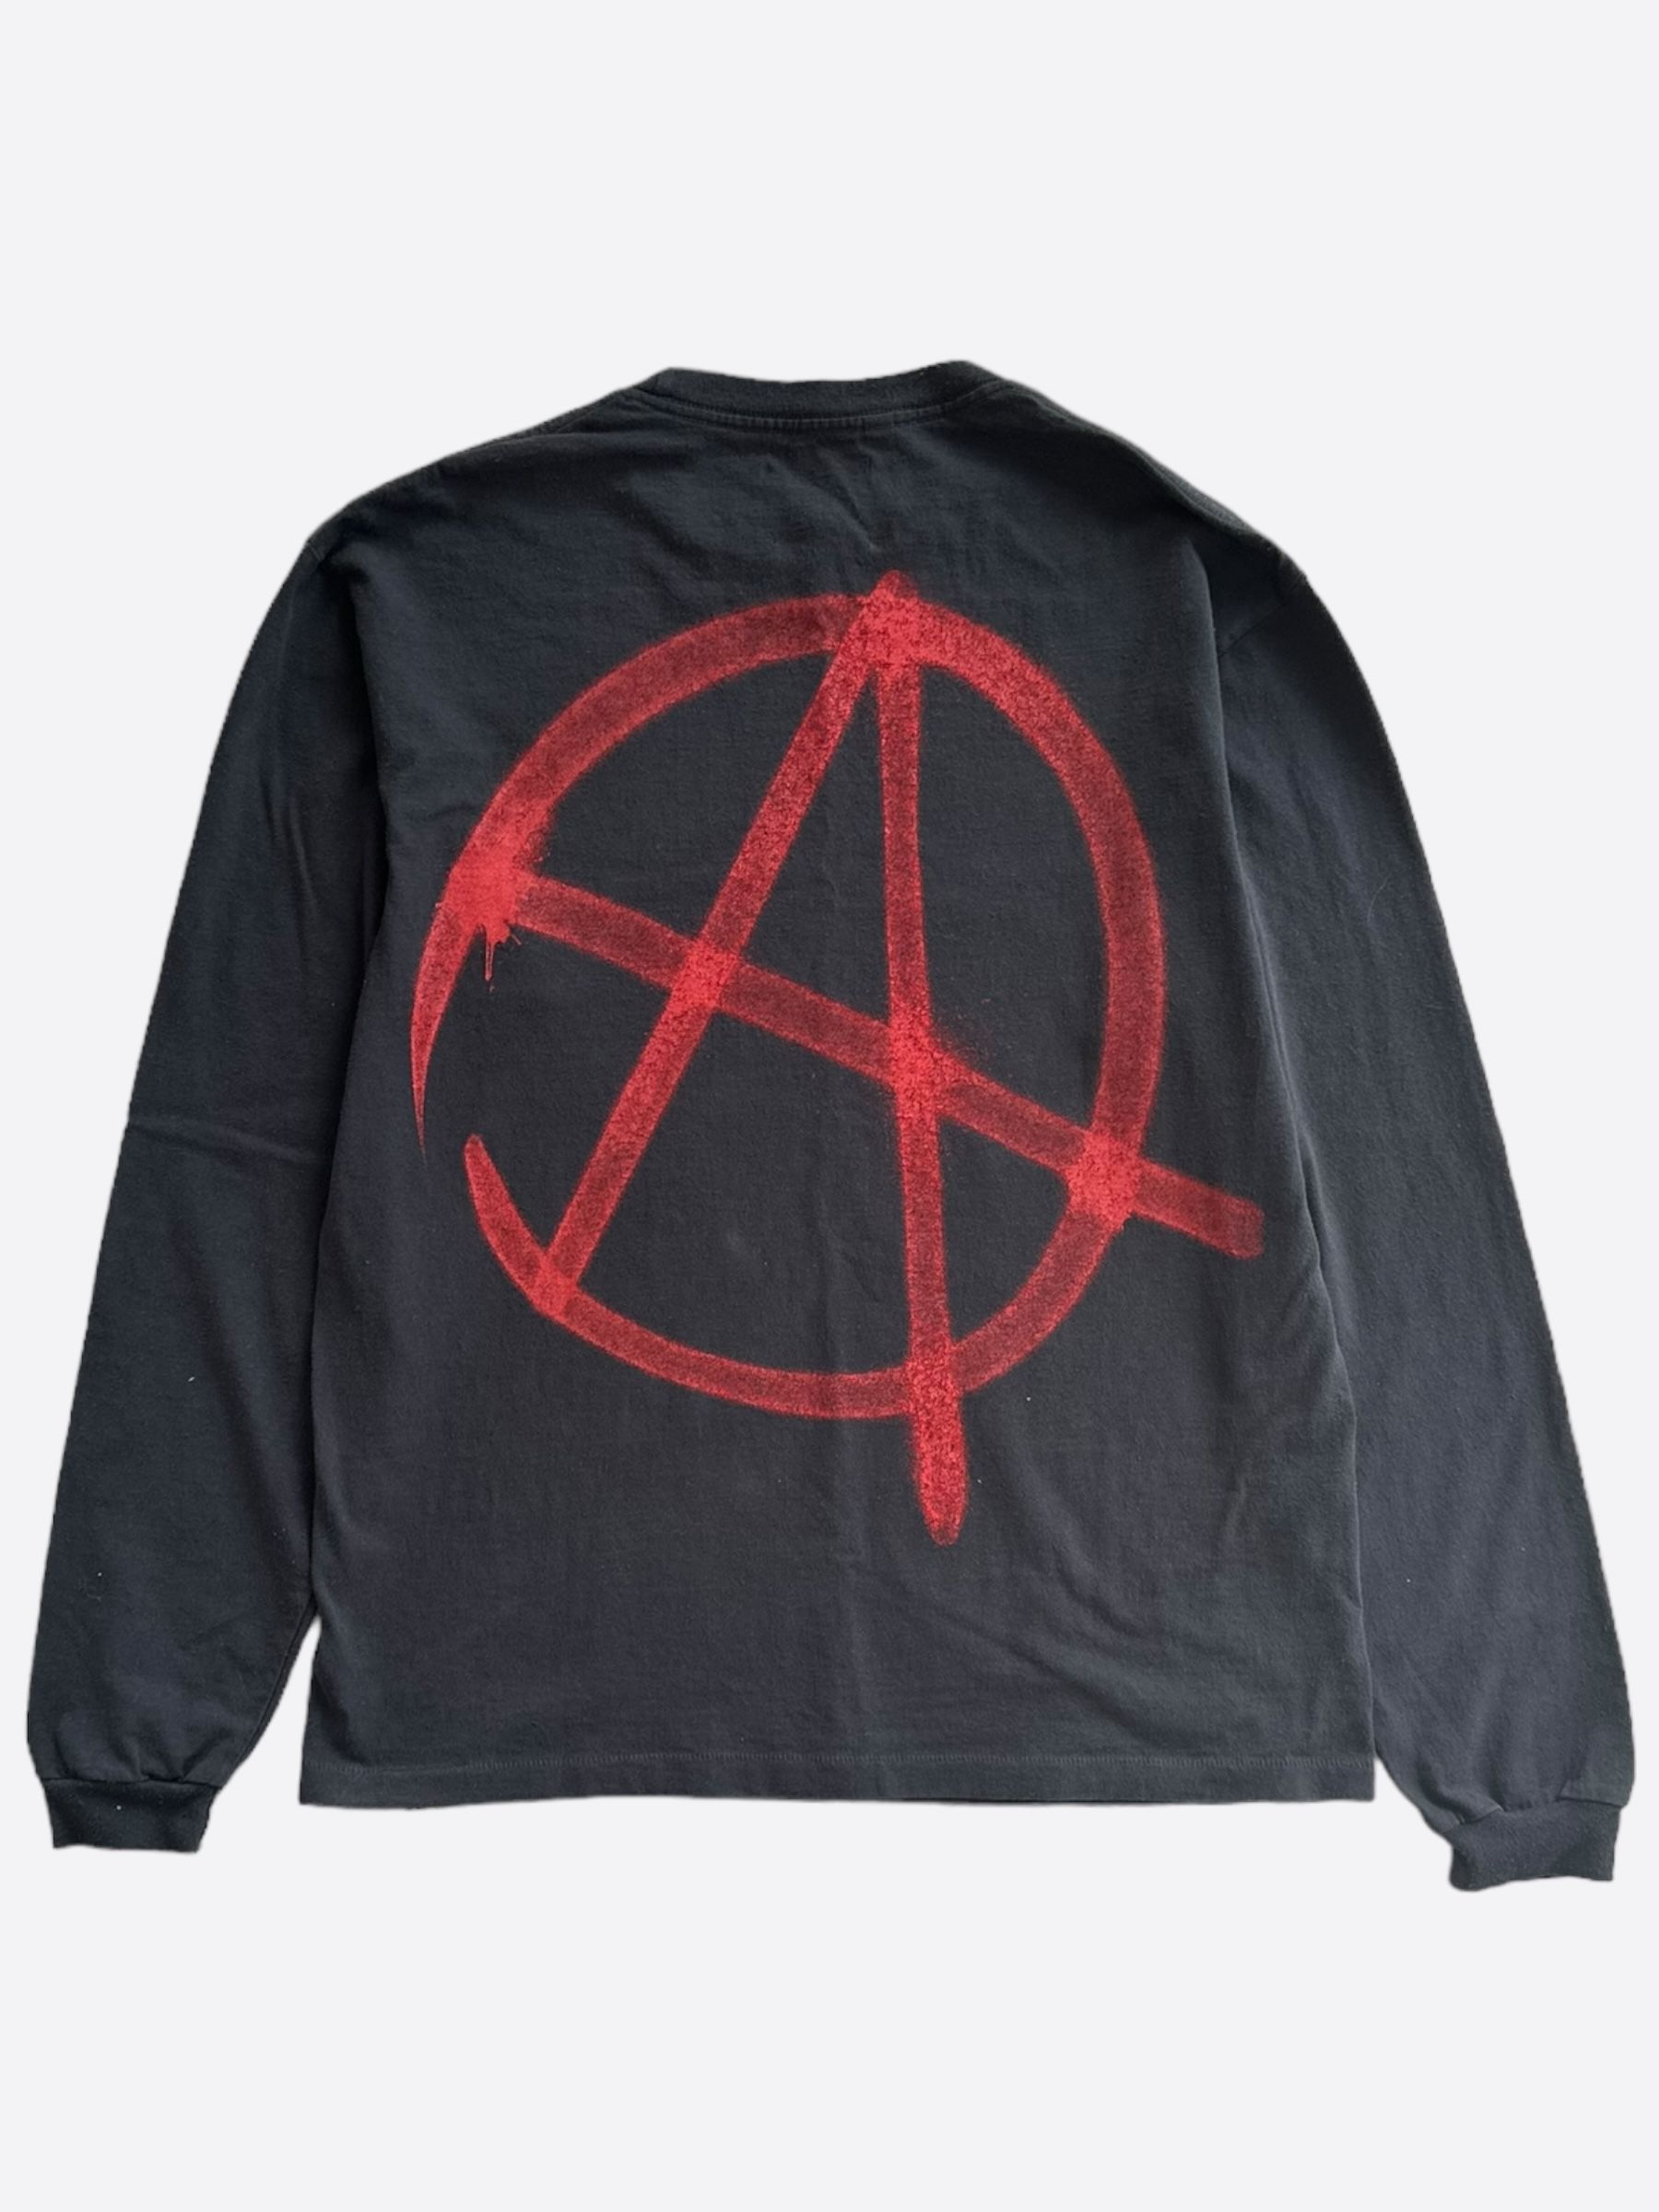 Pre-owned Gallery Dept. Black & Red Anarchy Logo T-shirt